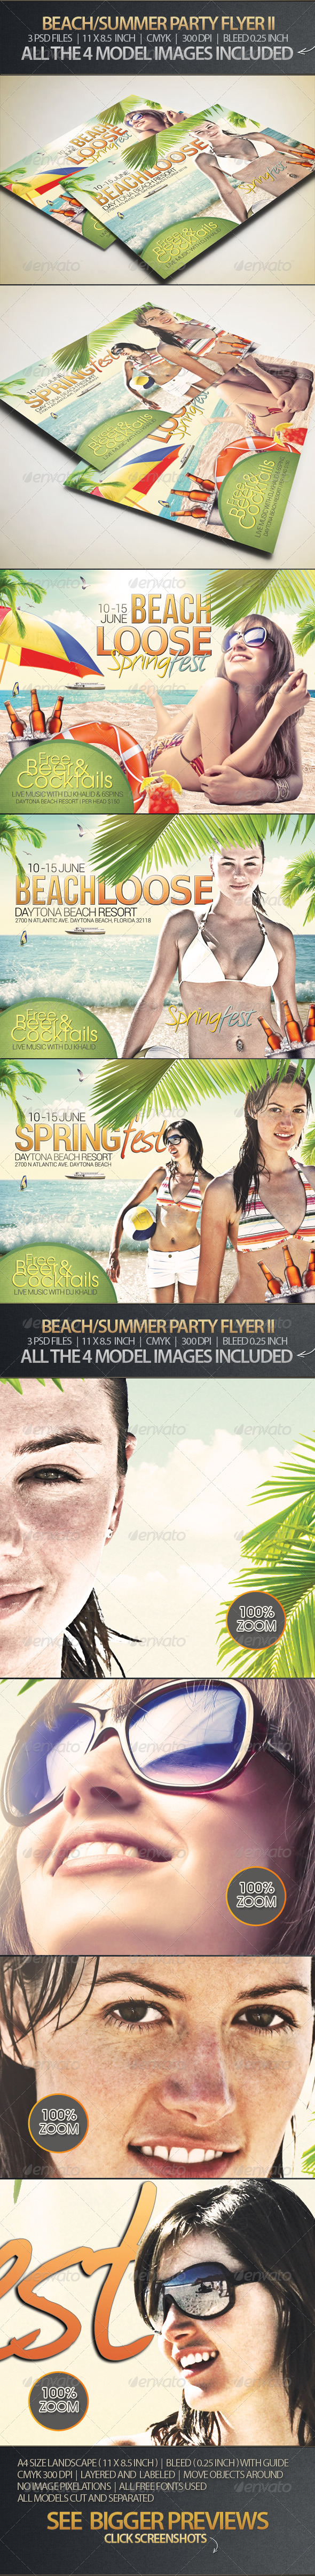 Beach, Spring or Summer Party Flyer II